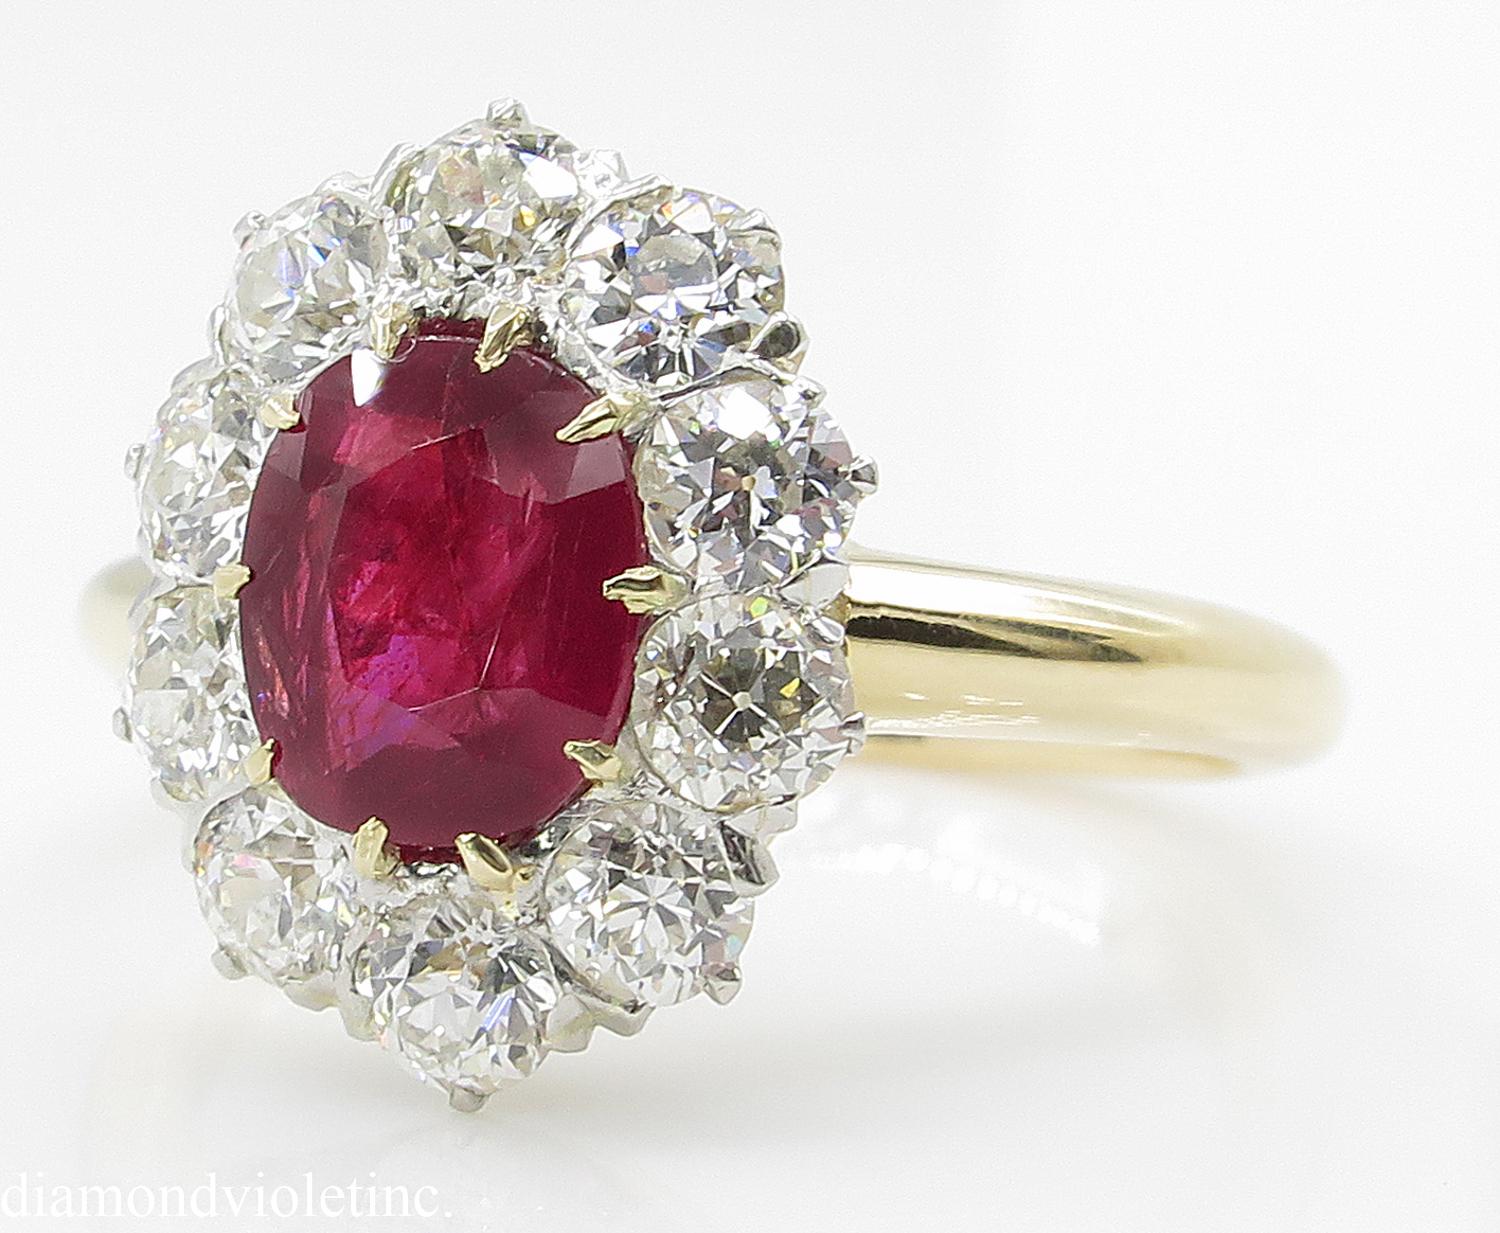 A super RARE find from our Estate Color Stone Collection! IMPORTANT Authentic Antique Victorian Piece! The Ruby is beyond words!! A NATURAL, NOT HEATED, Red Transparent Color! AGL Certified 1.21ct Cushion Shape, Very Brilliant. BURMESE Origin!!